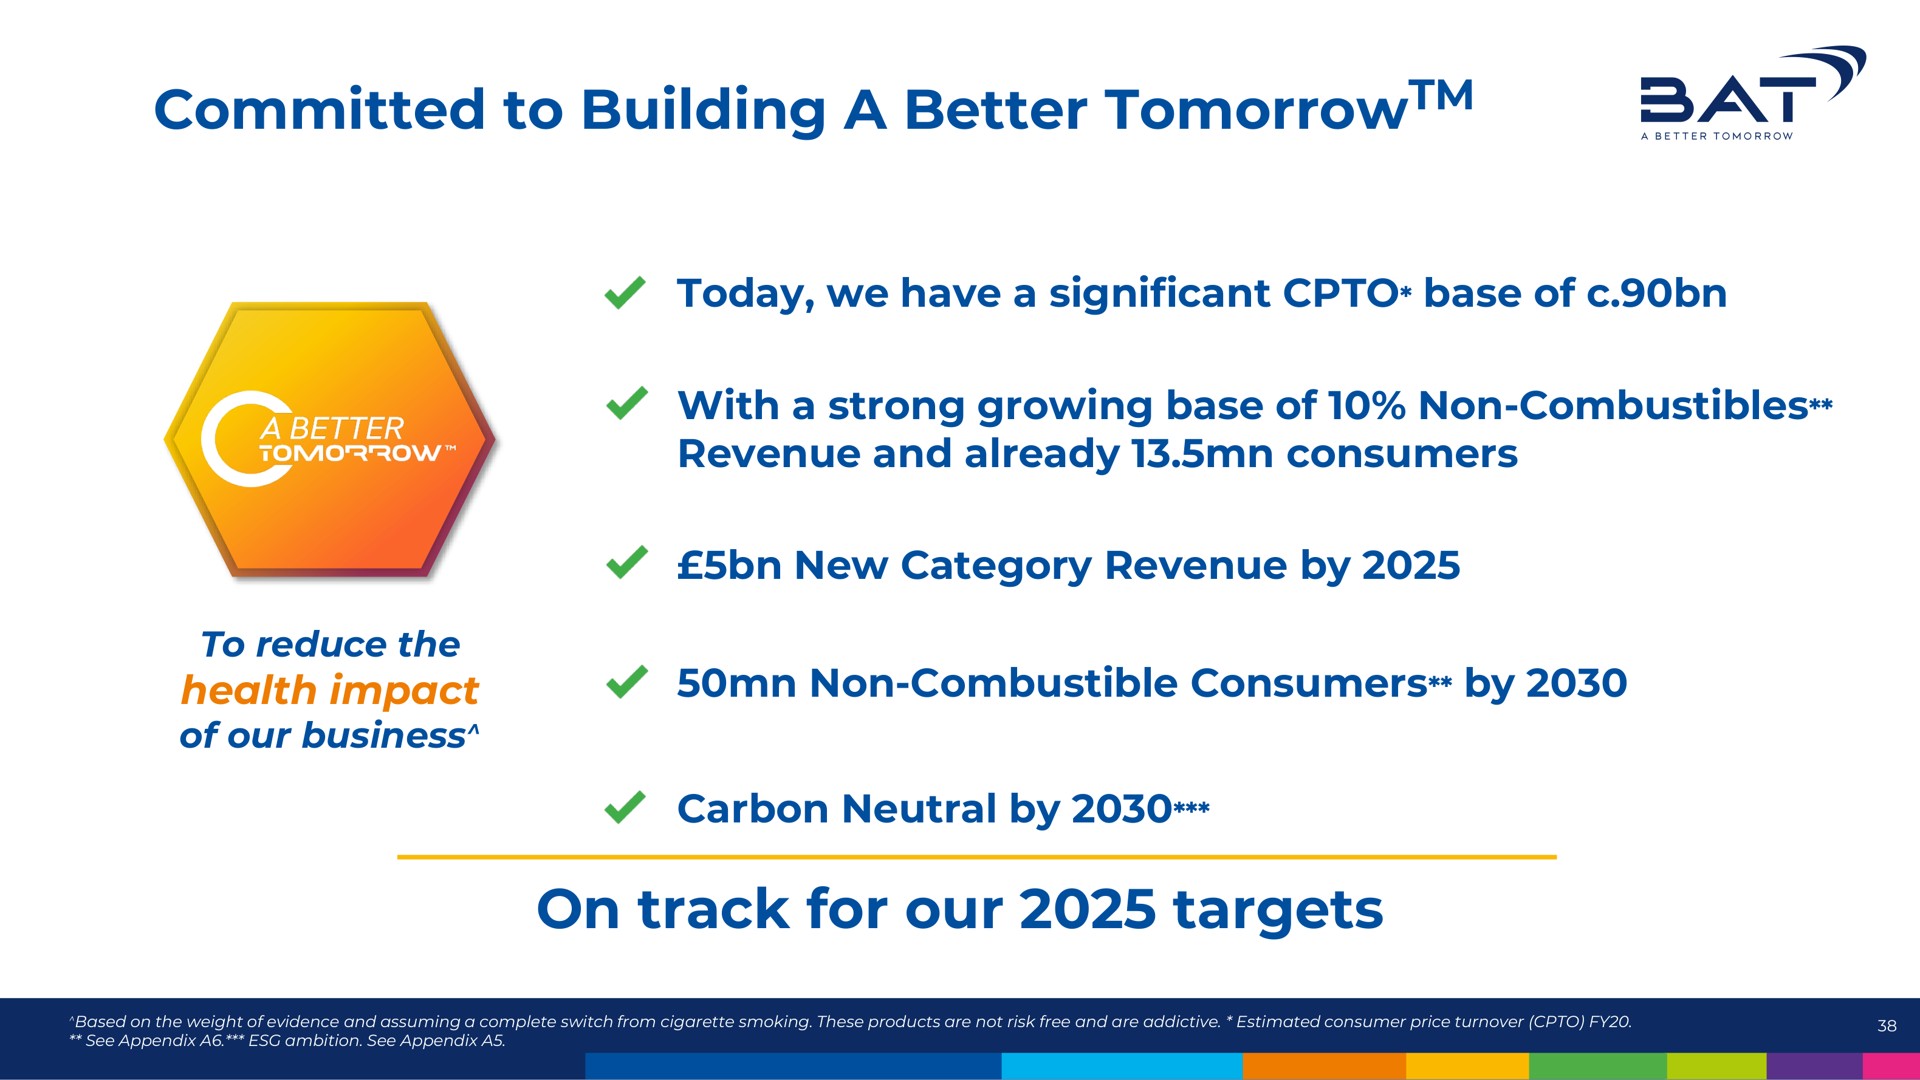 committed to building a better on track for our targets tomorrow at | BAT